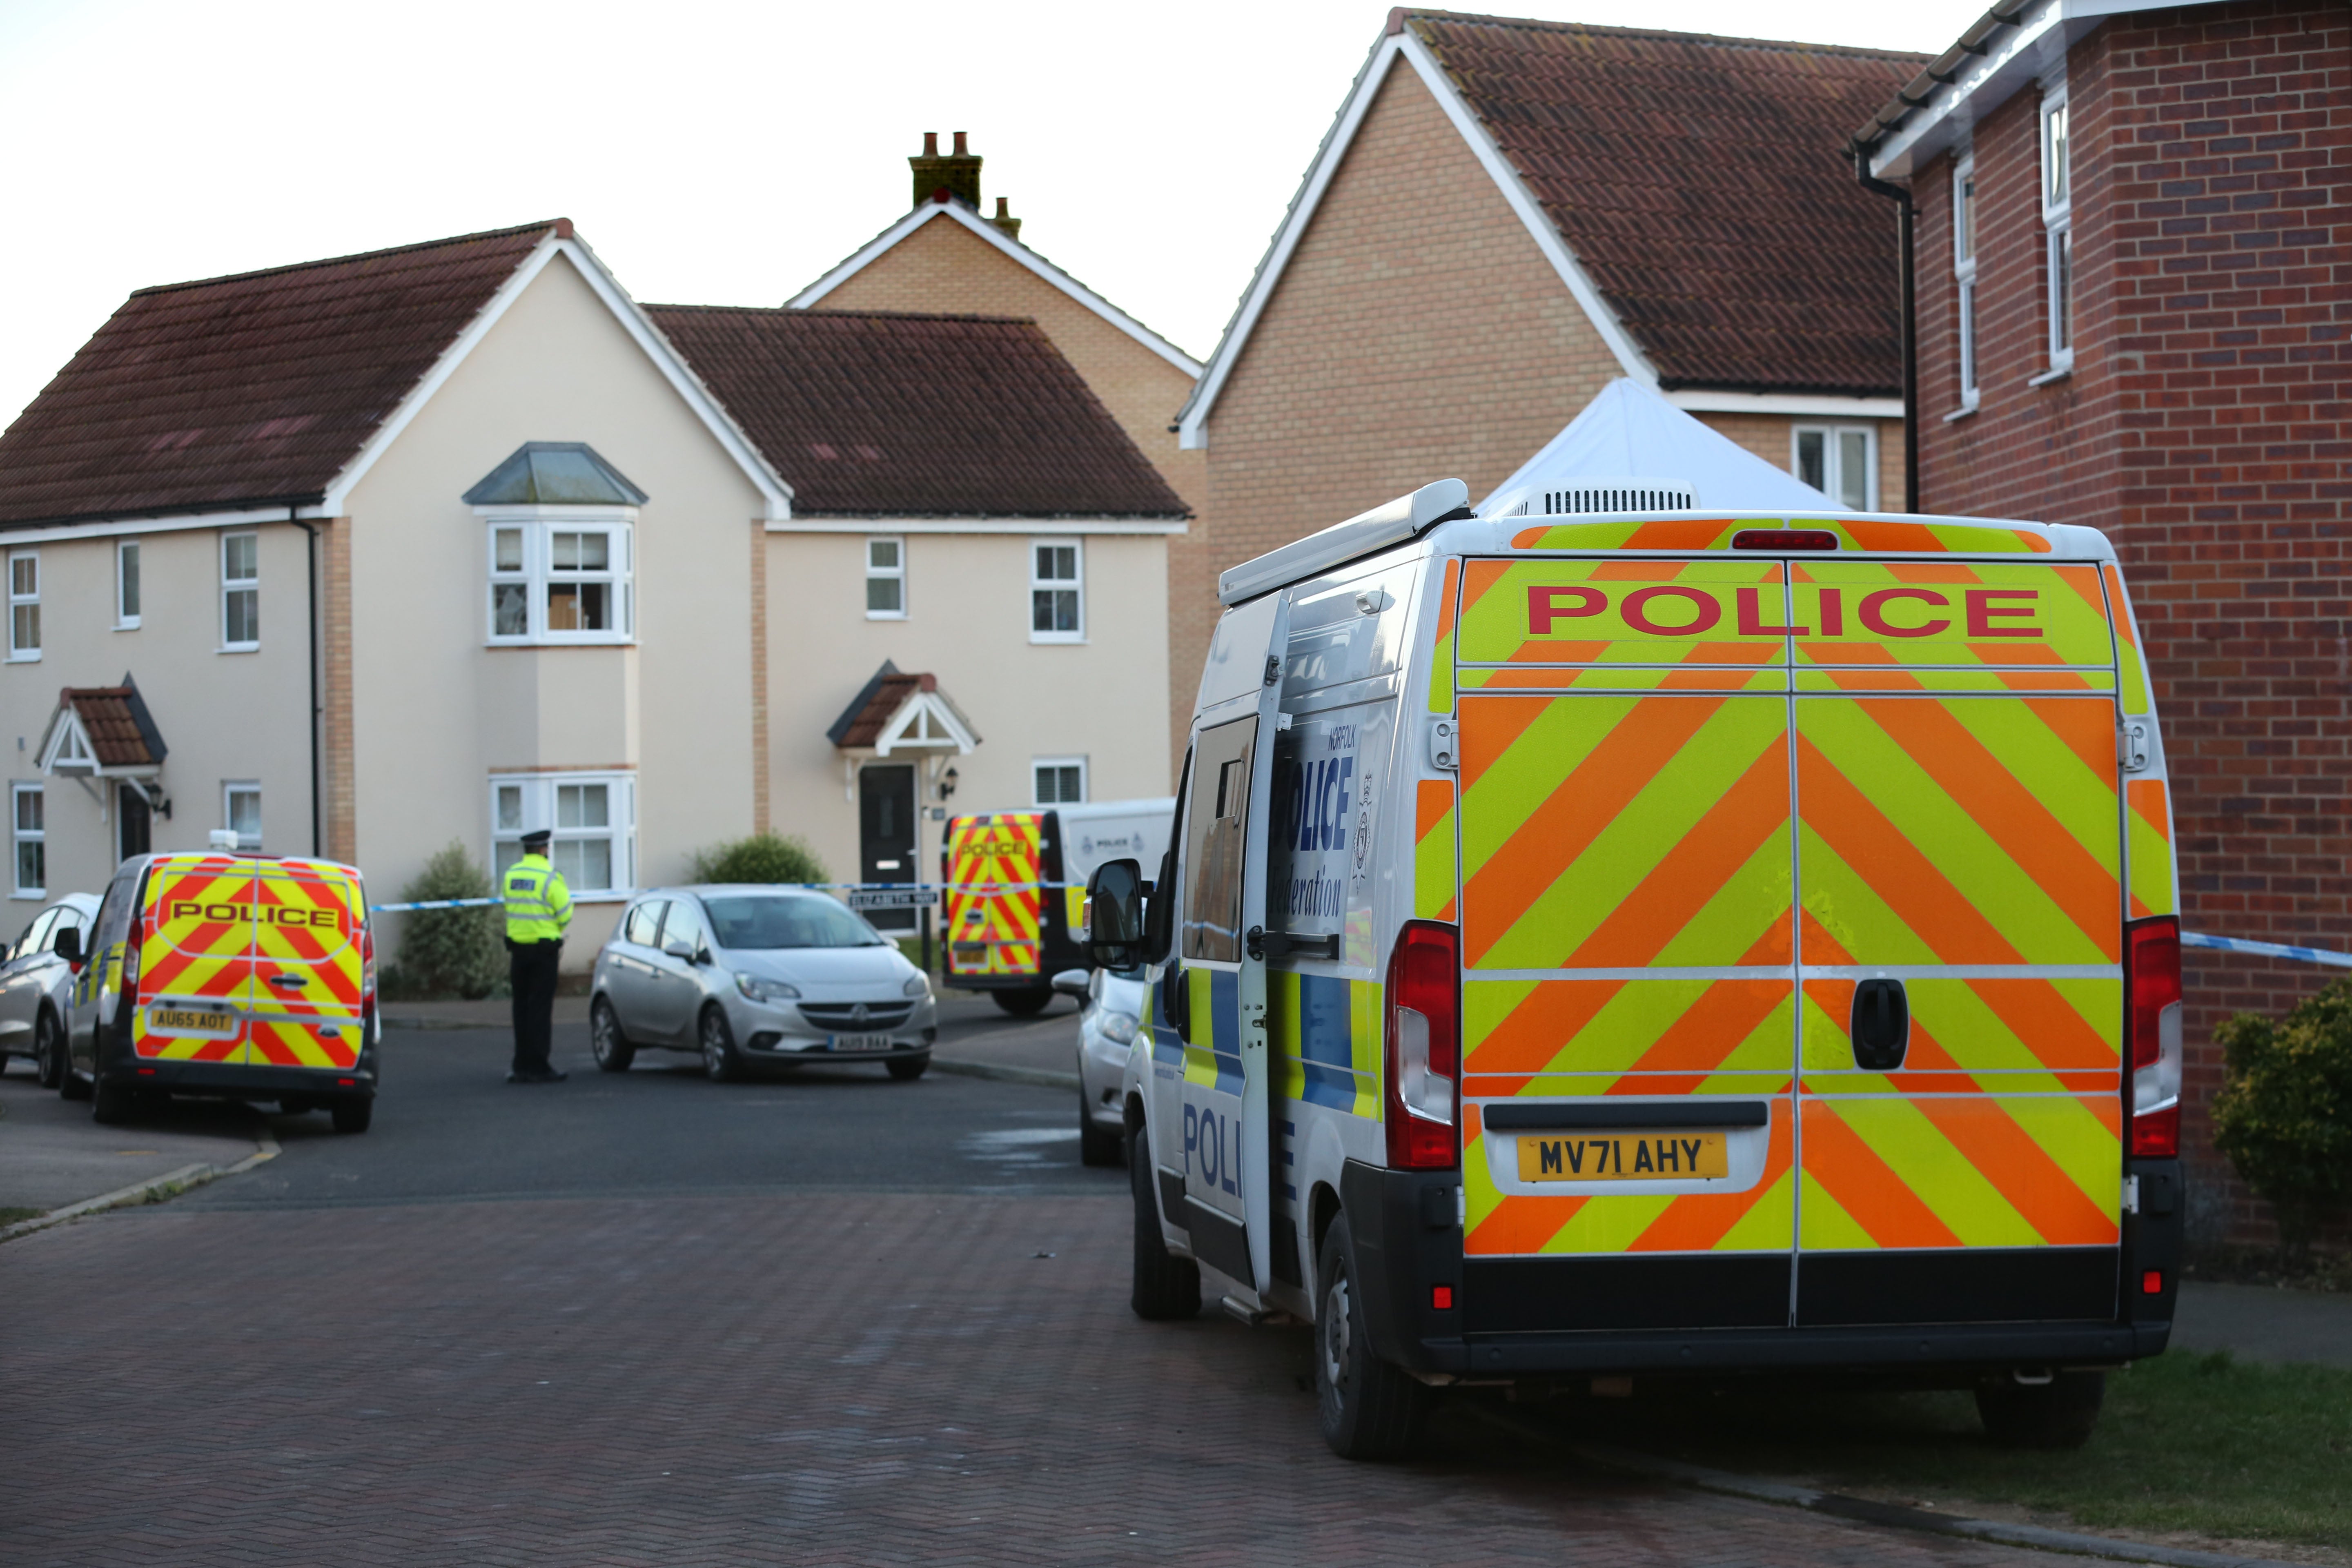 Police are carrying out extra patrols as detectives investigate at Allan Bedford Crescent